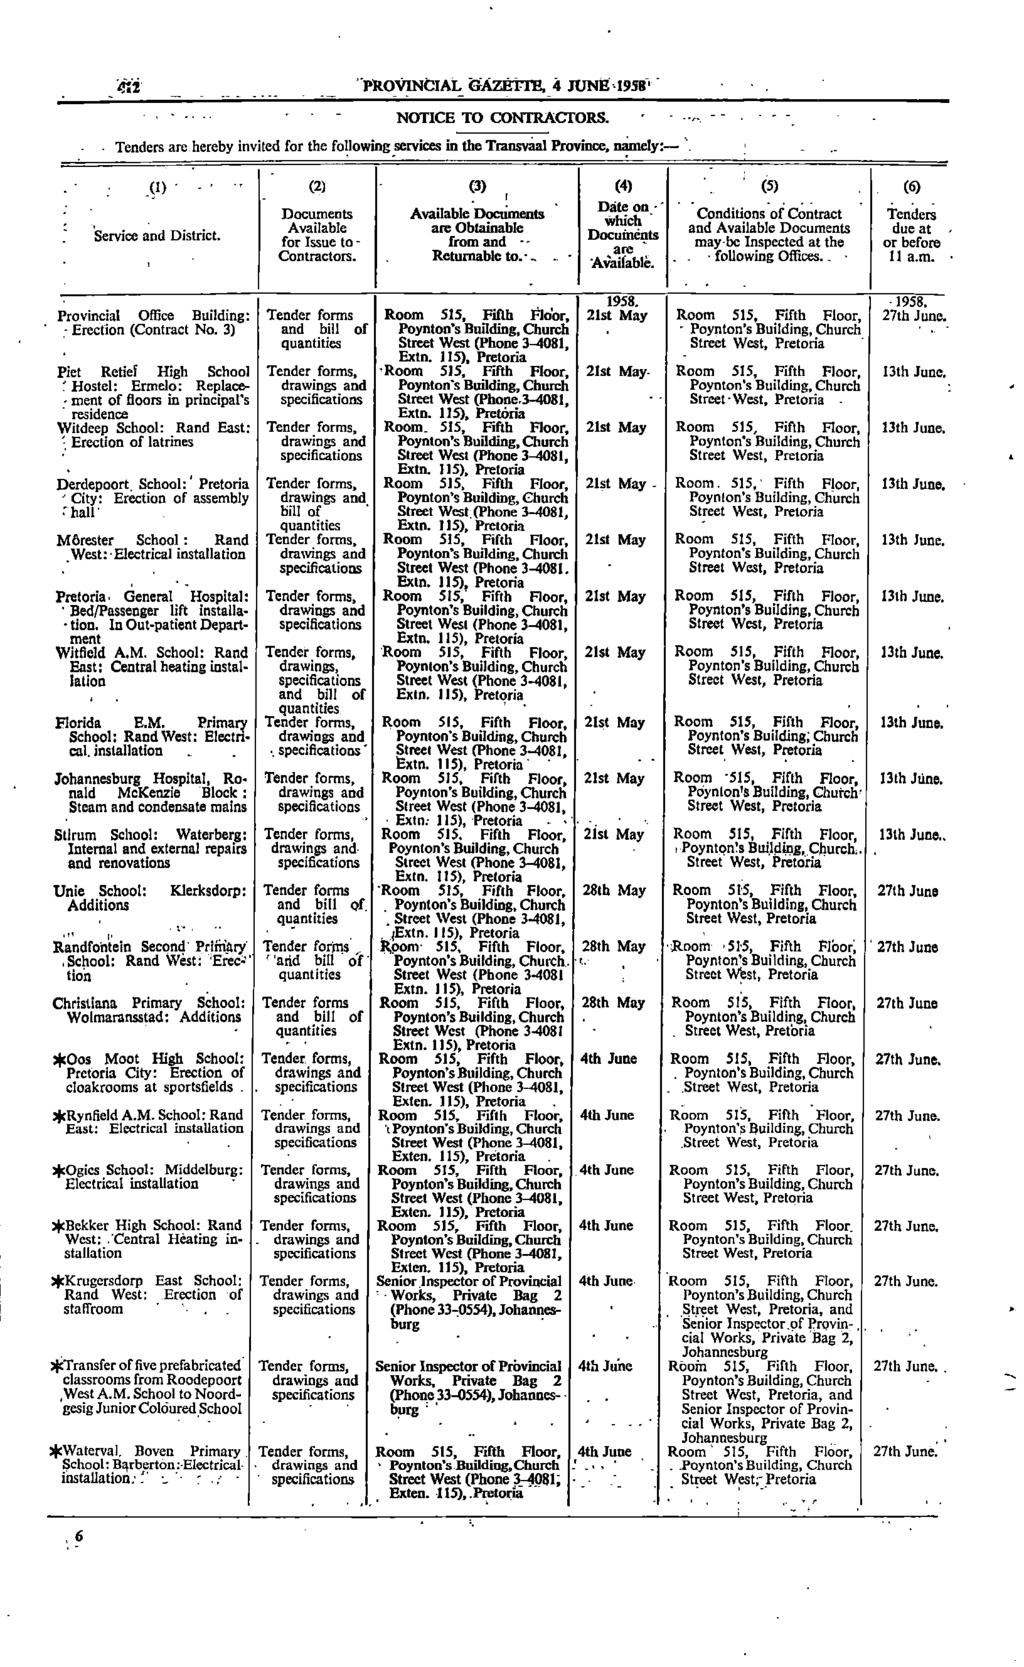 di _ PROVINCIALJUNE19581 INĊ GAZETTE 4 NOTICE TO CONTRACTORS Tenders are hereby invited for the following services in the Transvaal Province namely: _ (1) " (2) (3) (4) (5) (6) i k " " Documents